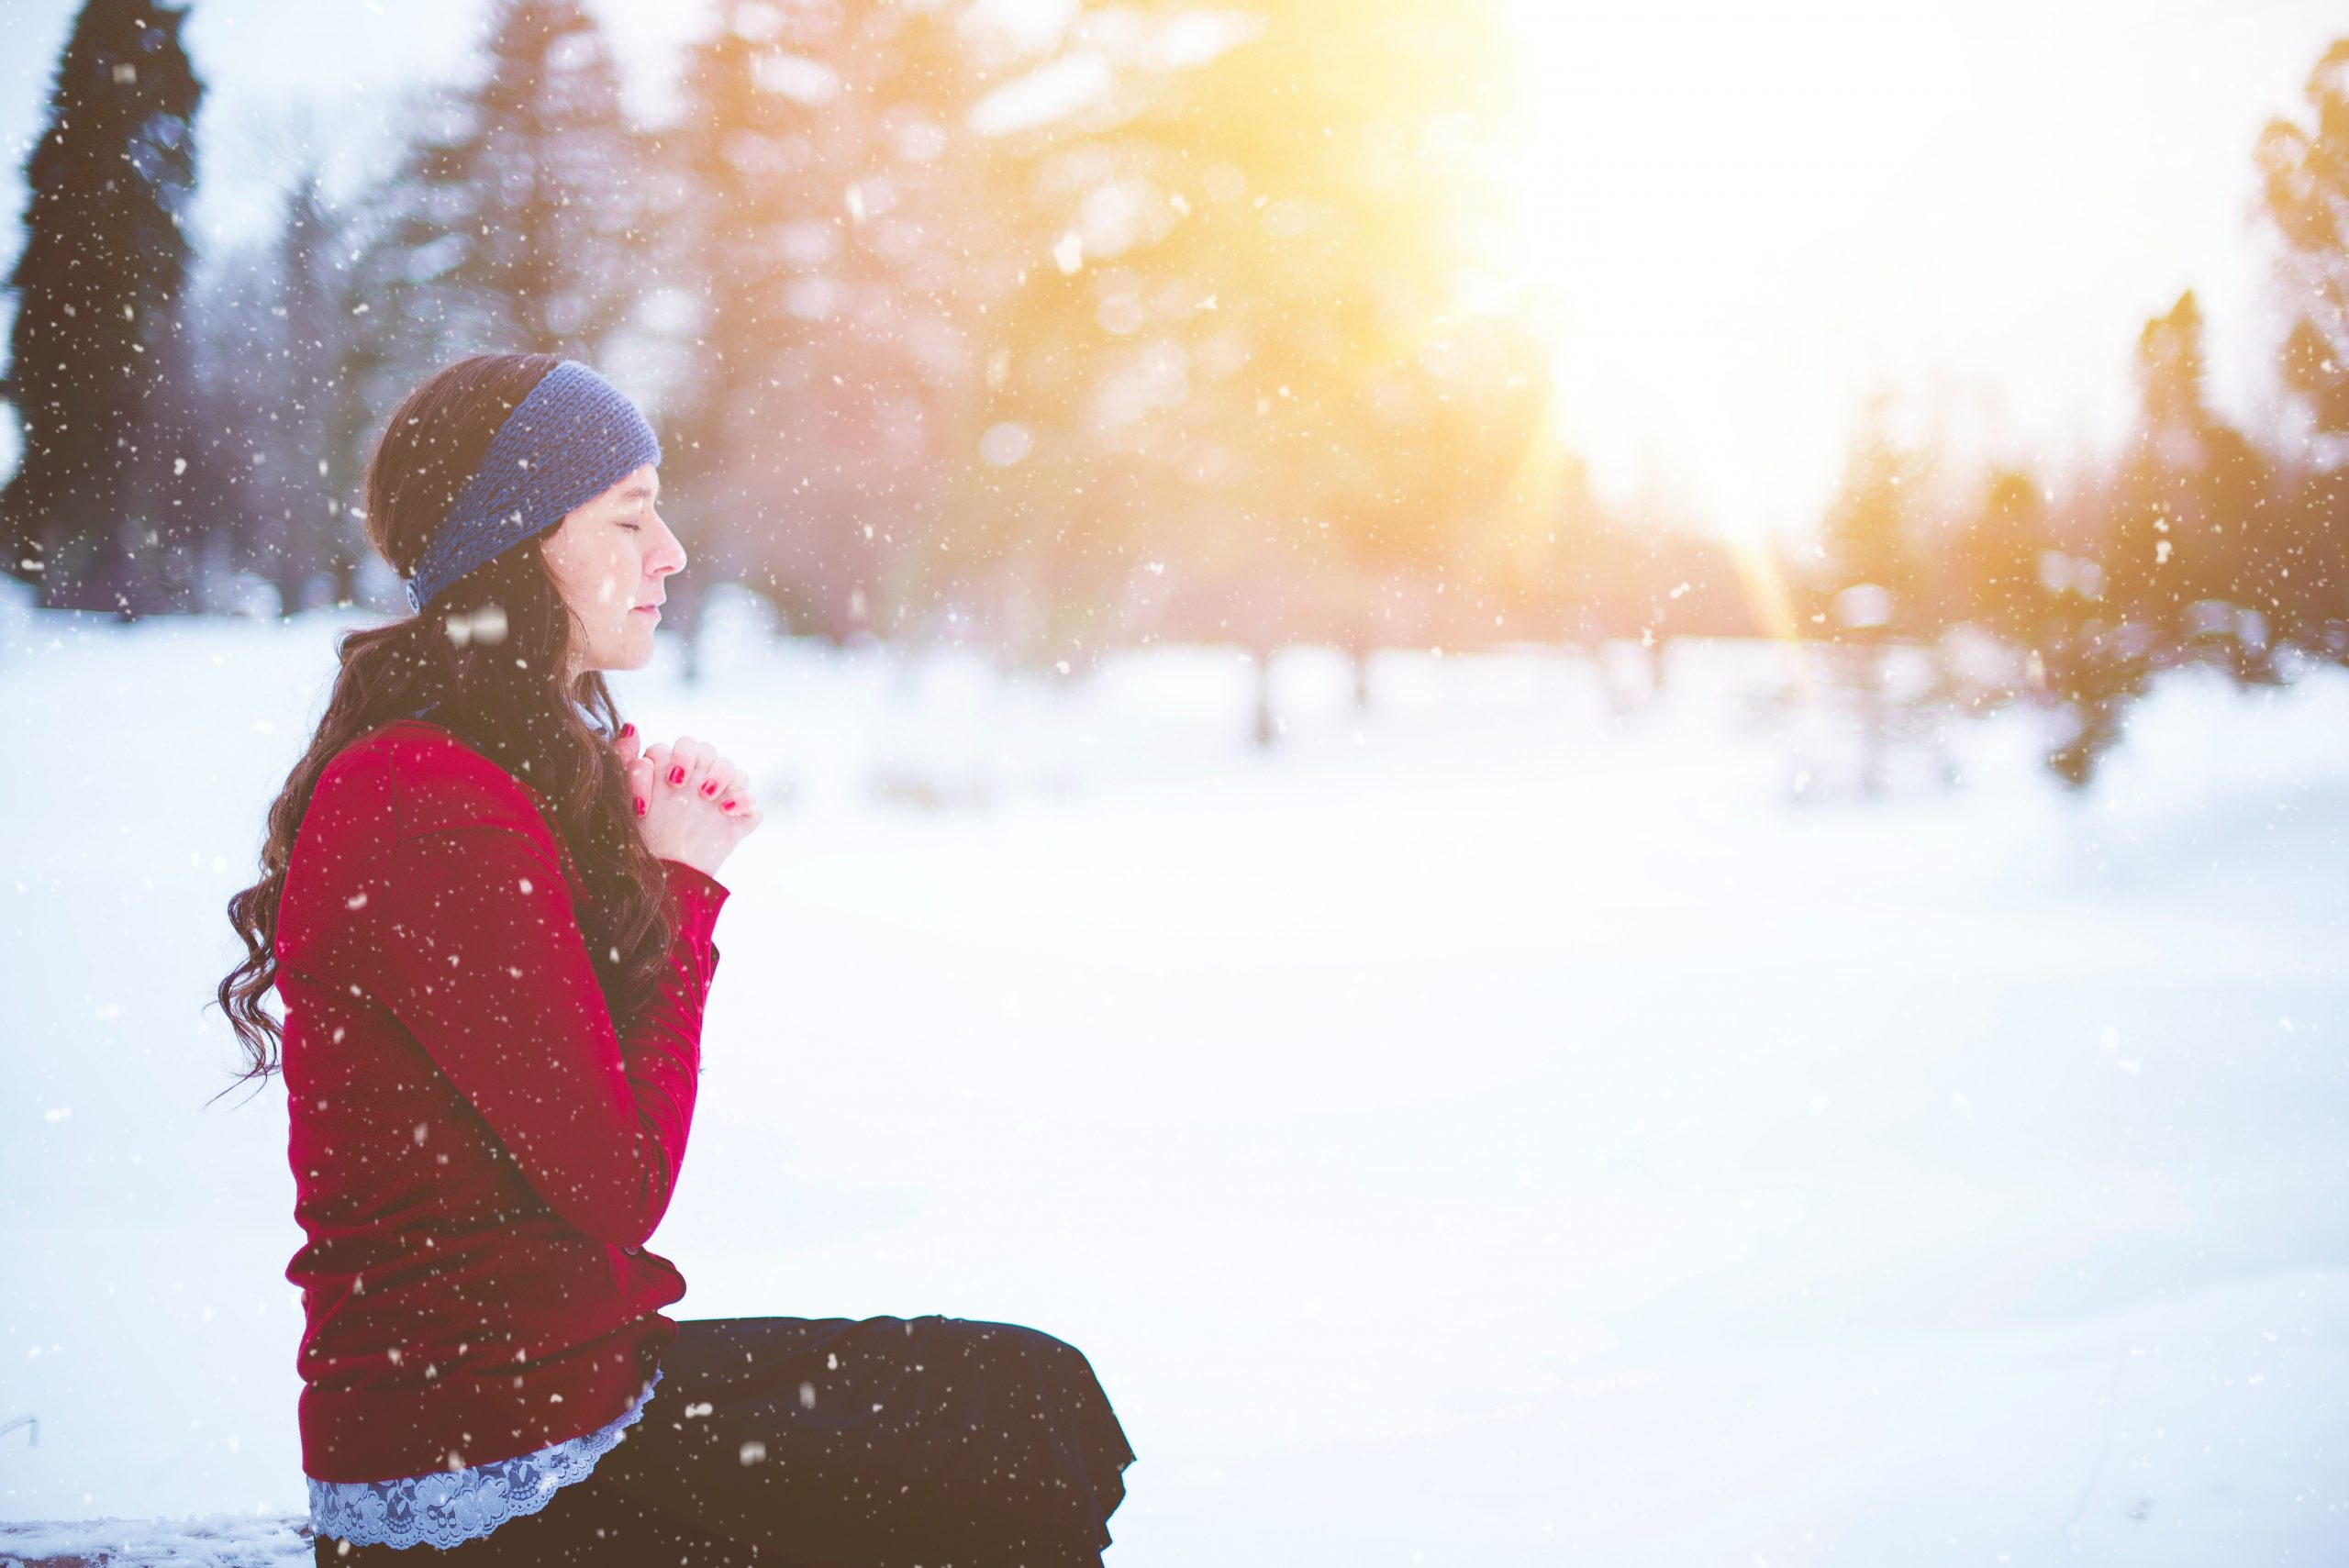 Top Tips To Cope With Poor Mental Health During The Winter